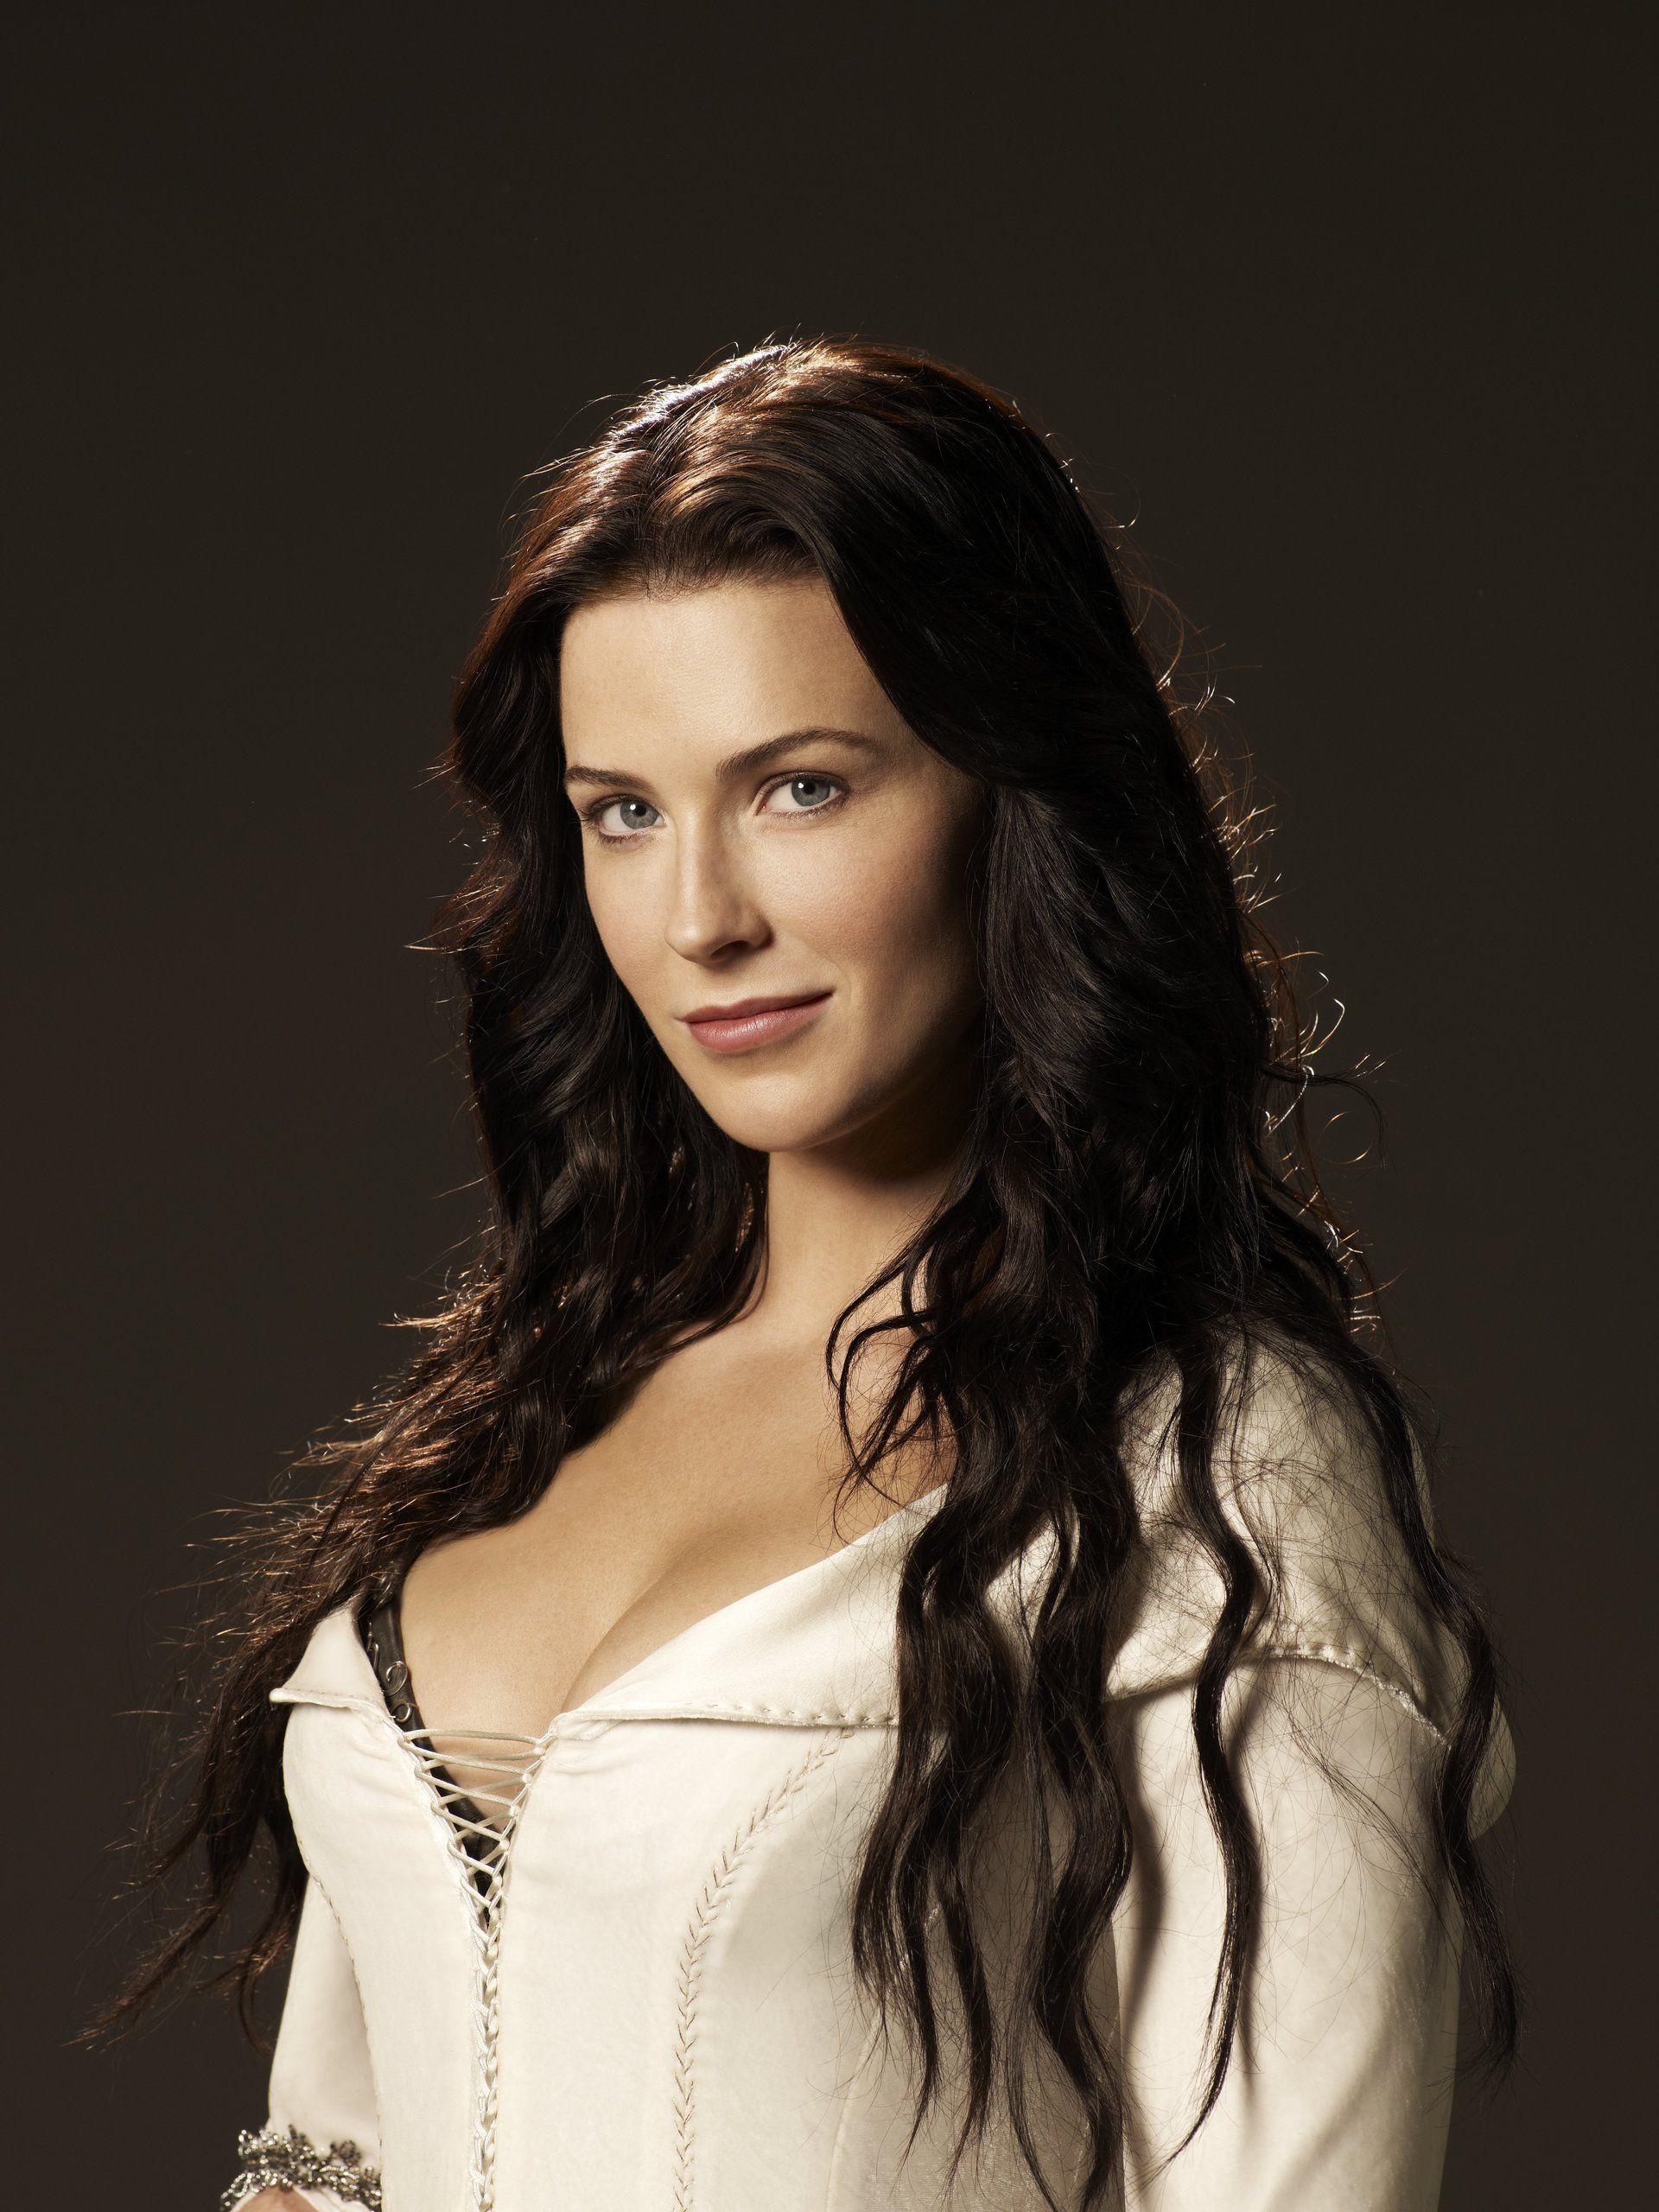 51 Hottest Bridget Regan Big Butt Pictures Will Drive You Wildly Enchanted With This Dashing Damsel 33